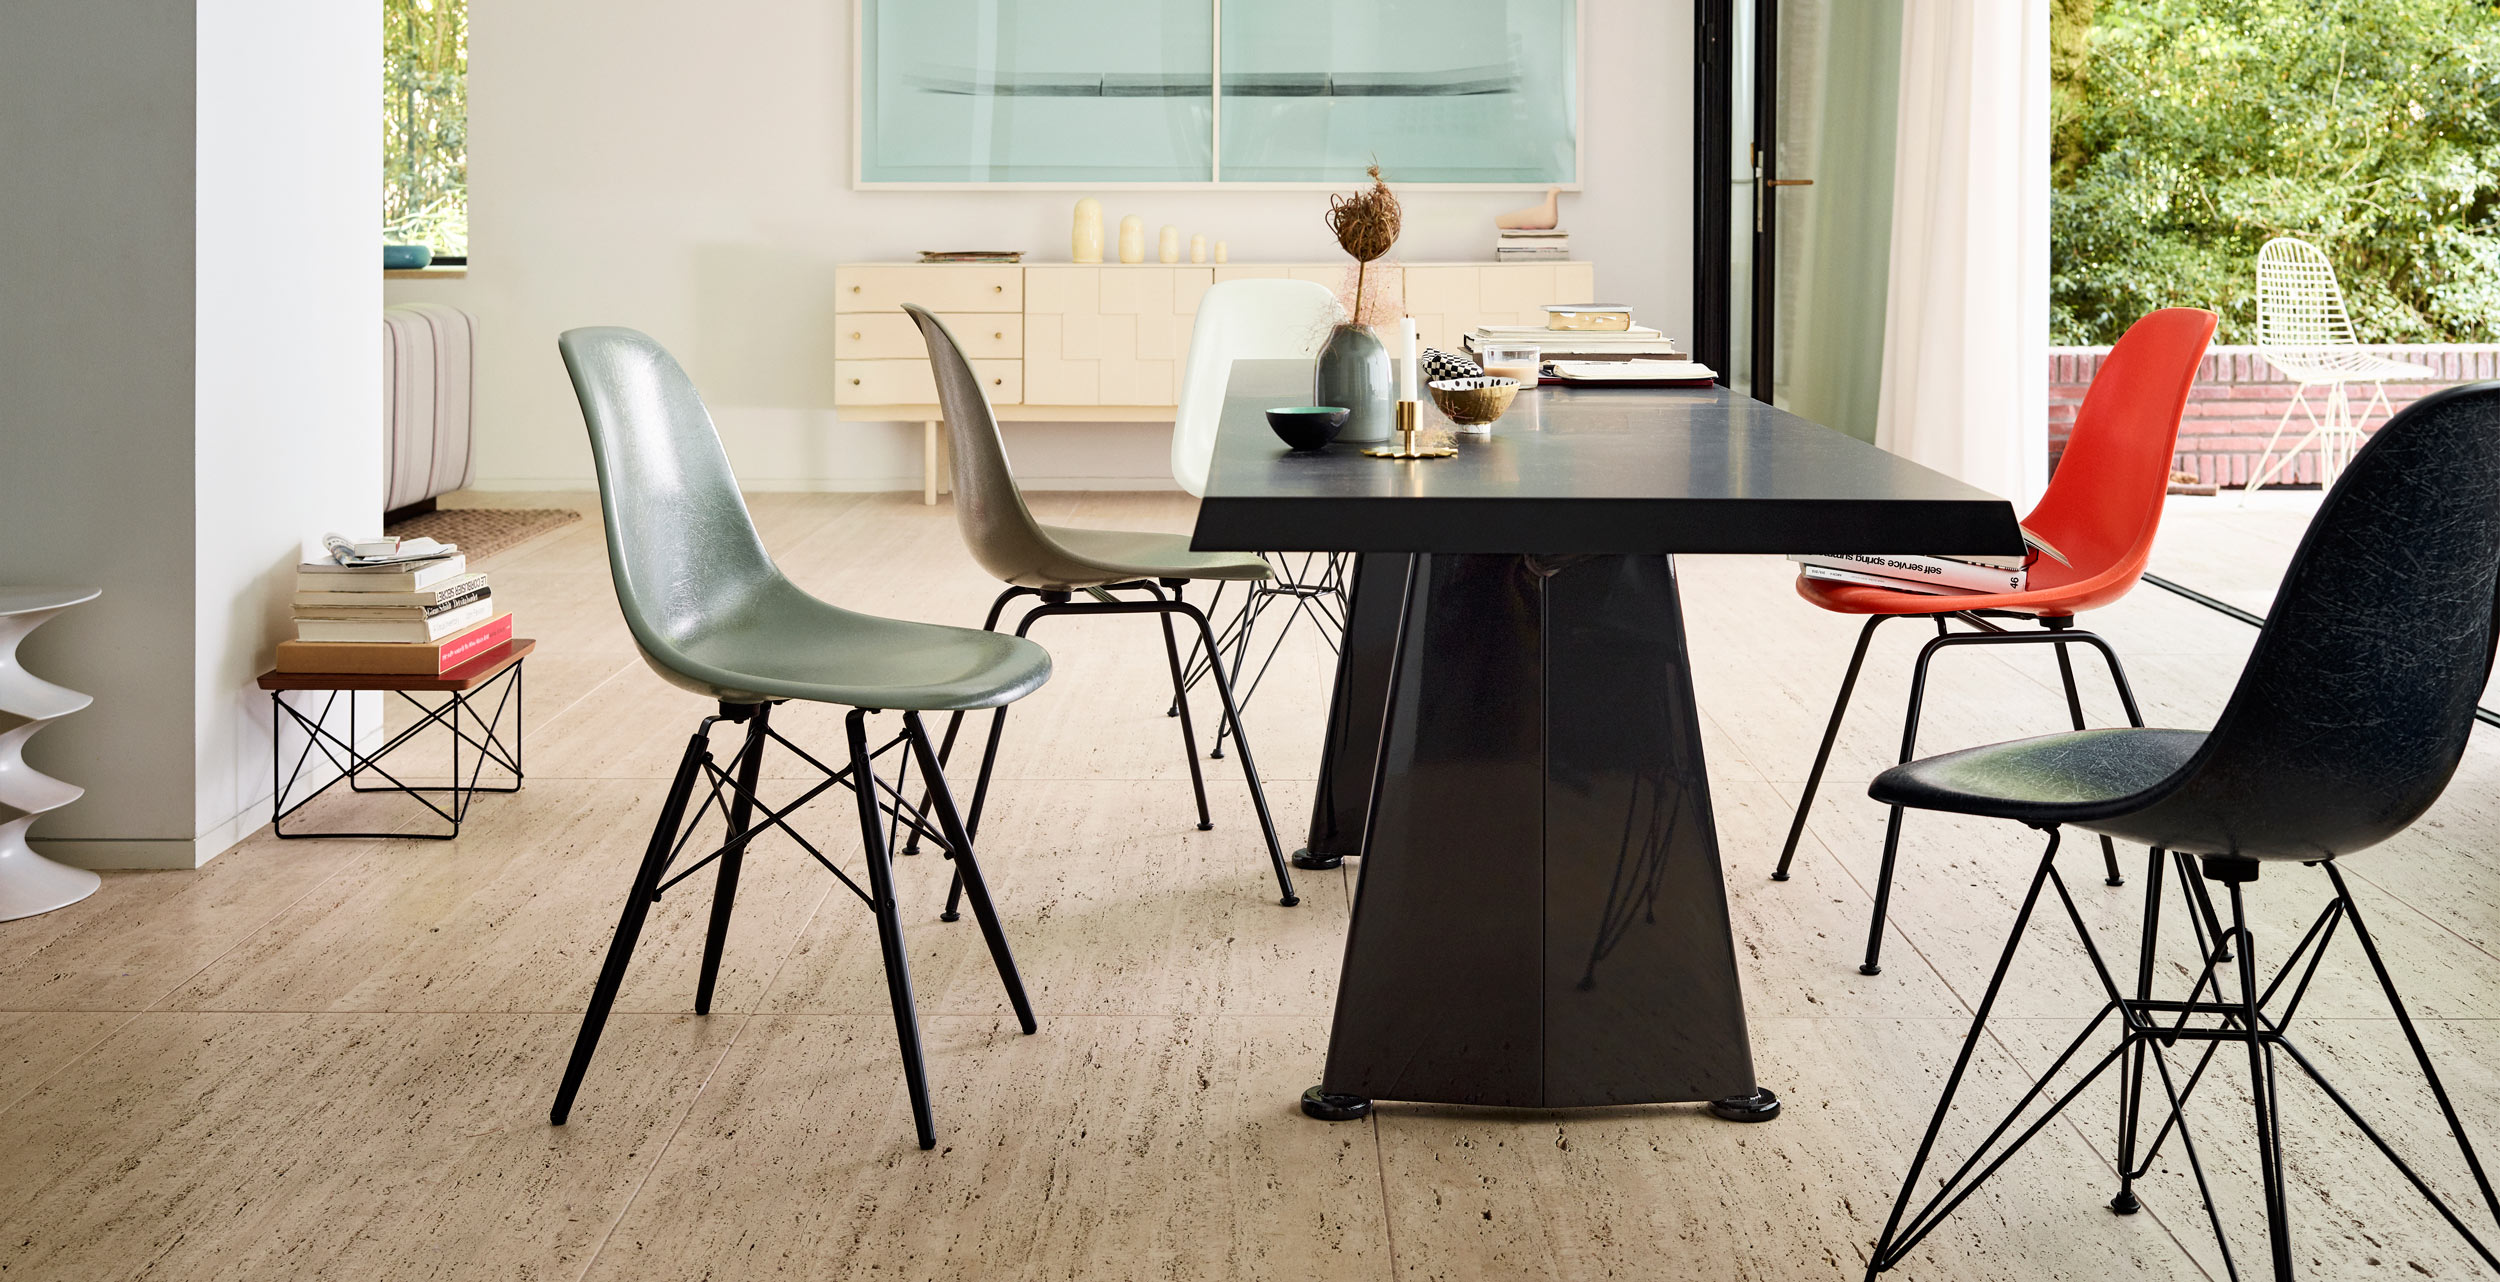 Vitra Eames Fiberglass DSR Chairs with Trapeze Table